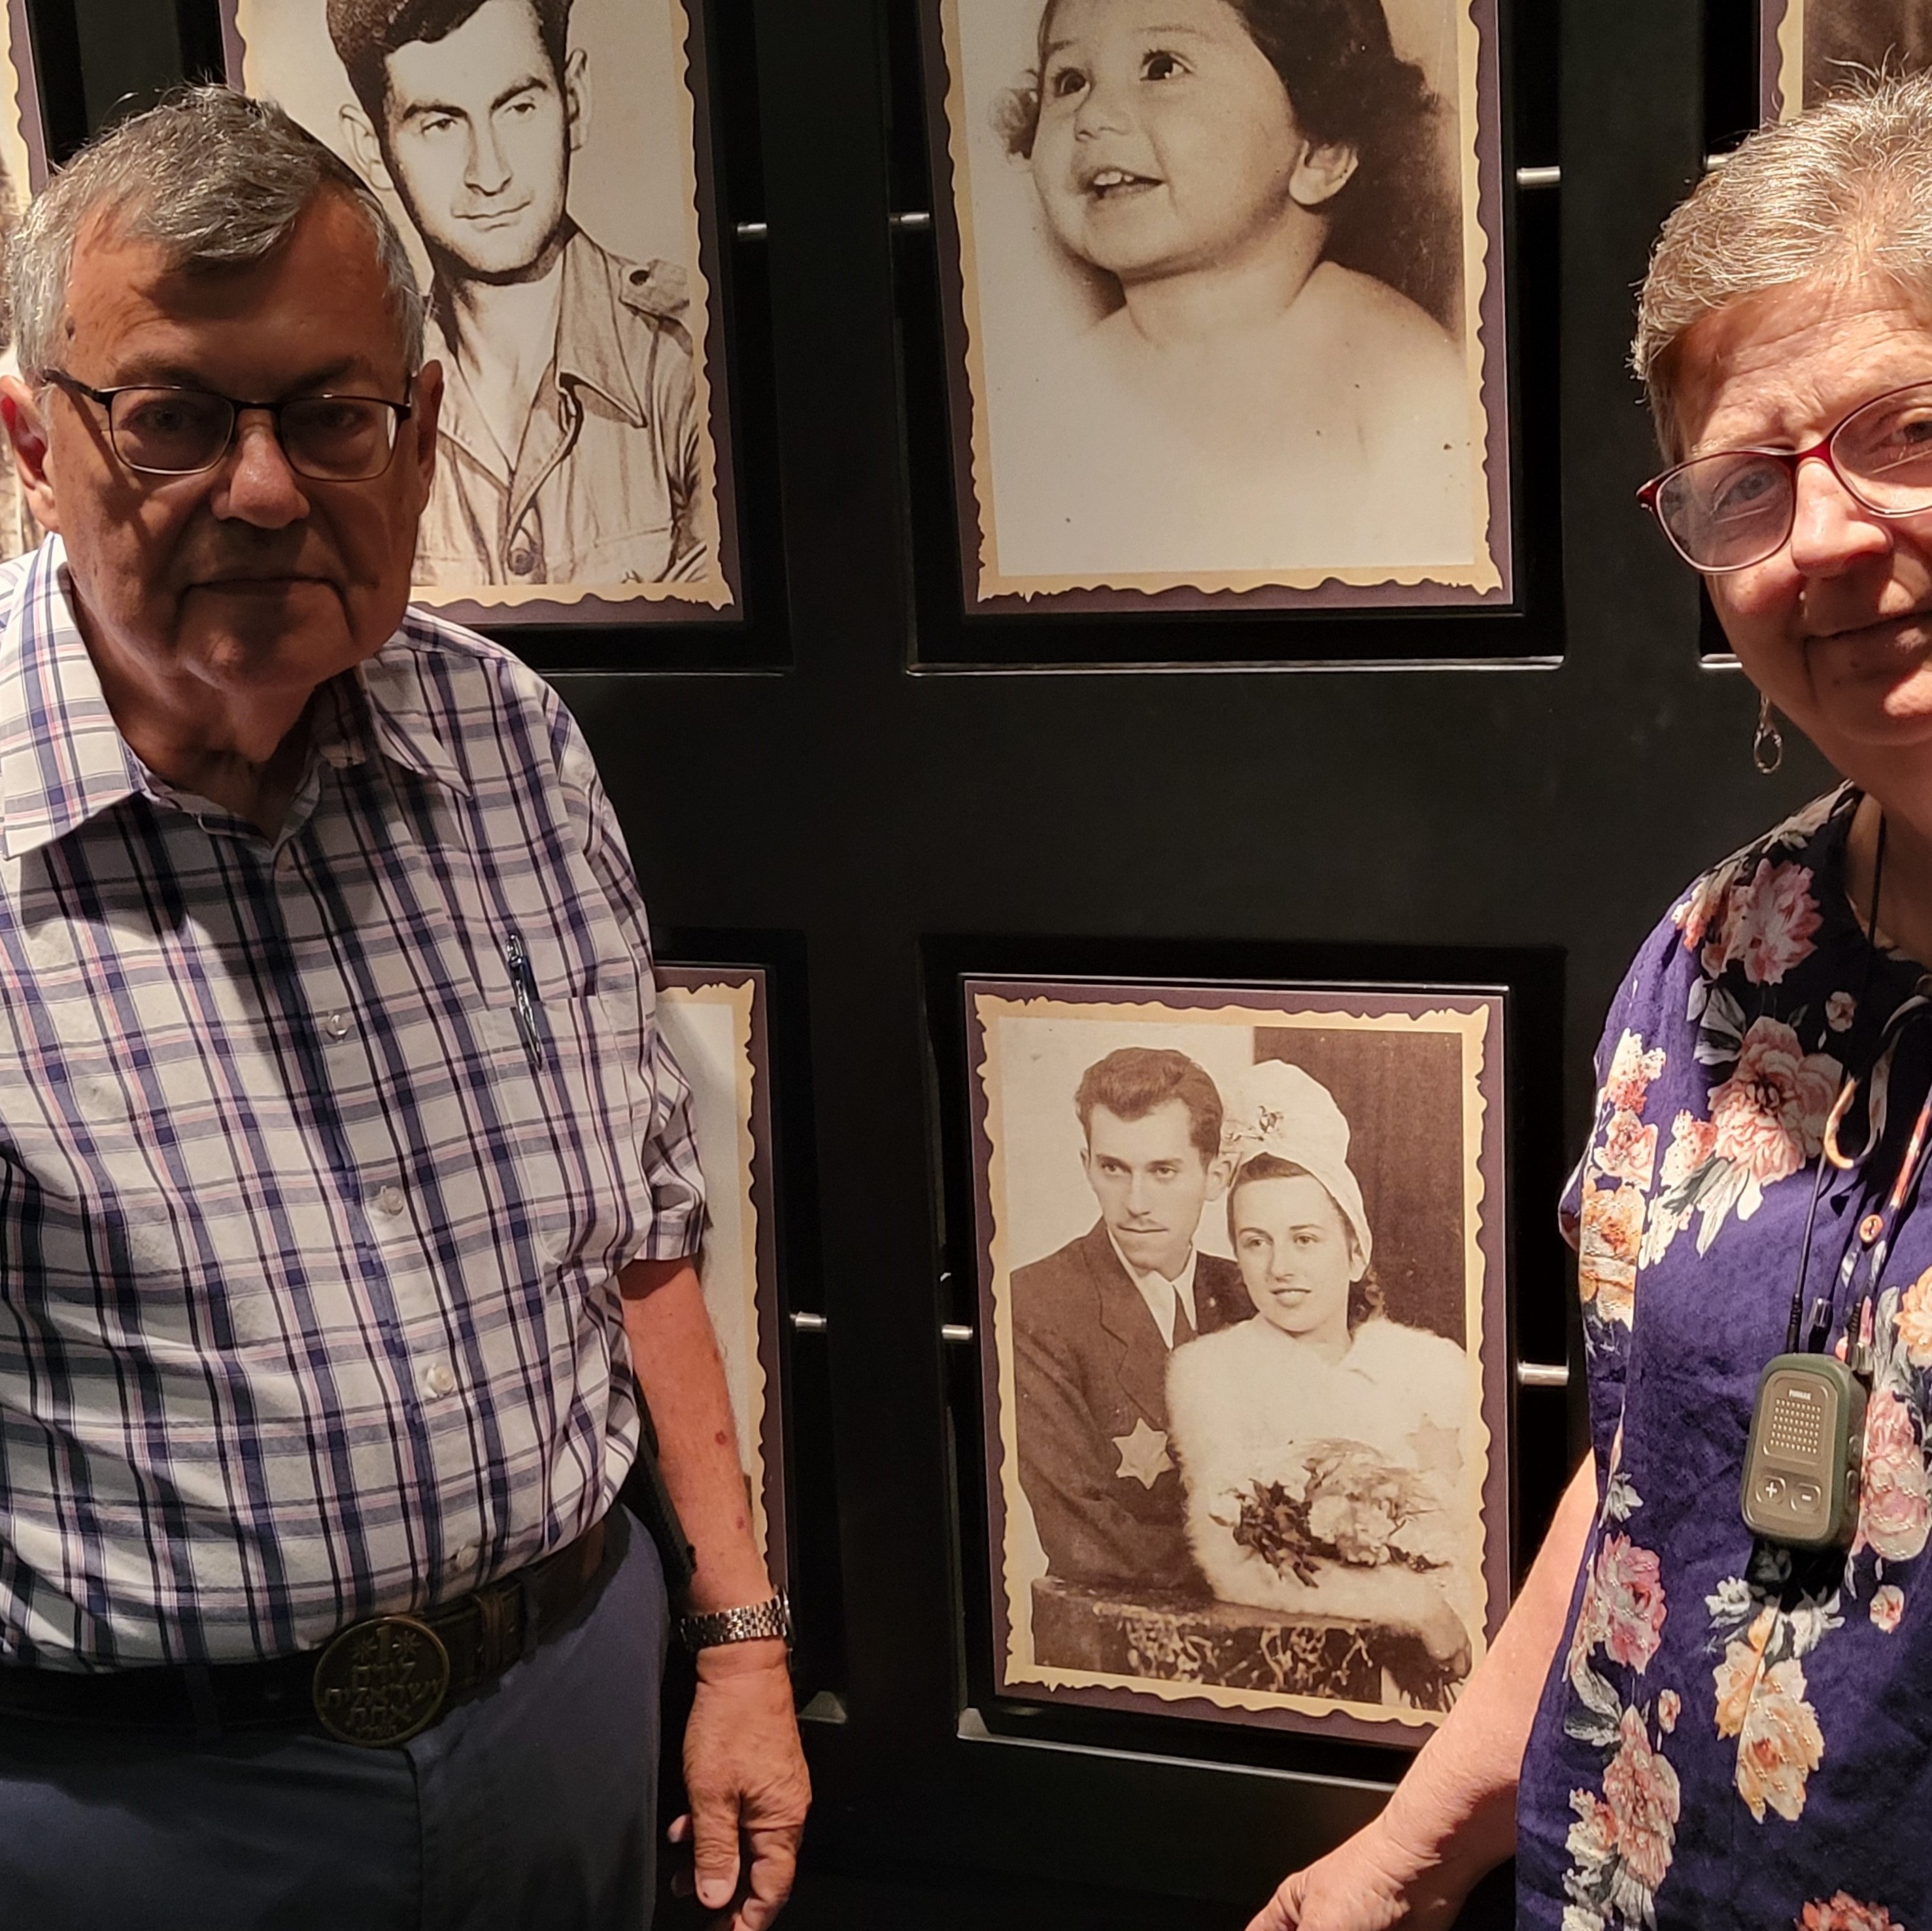 George Lebovitz and Shari Baellow by their parents' wedding picture on display at The Testimony House in Nir Galim, Israel.